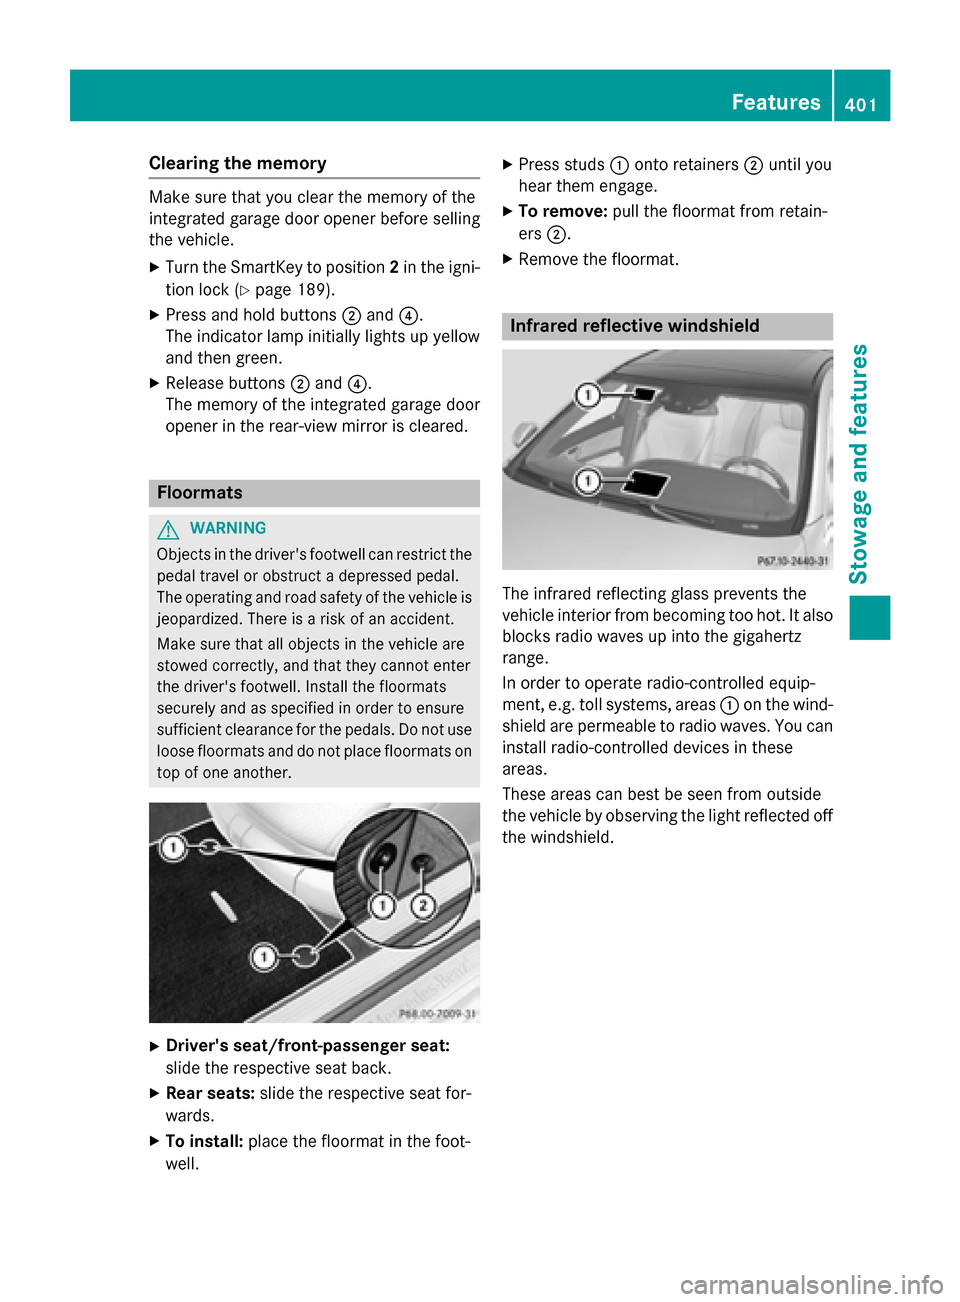 MERCEDES-BENZ S-Class 2015 W222 Owners Manual Clearing the memory
Make sure that you clear the memory of the
integrated garage door opener before selling
the vehicle.
X Turn the SmartKey to position 2in the igni-
tion lock (Y page 189).
X Press a